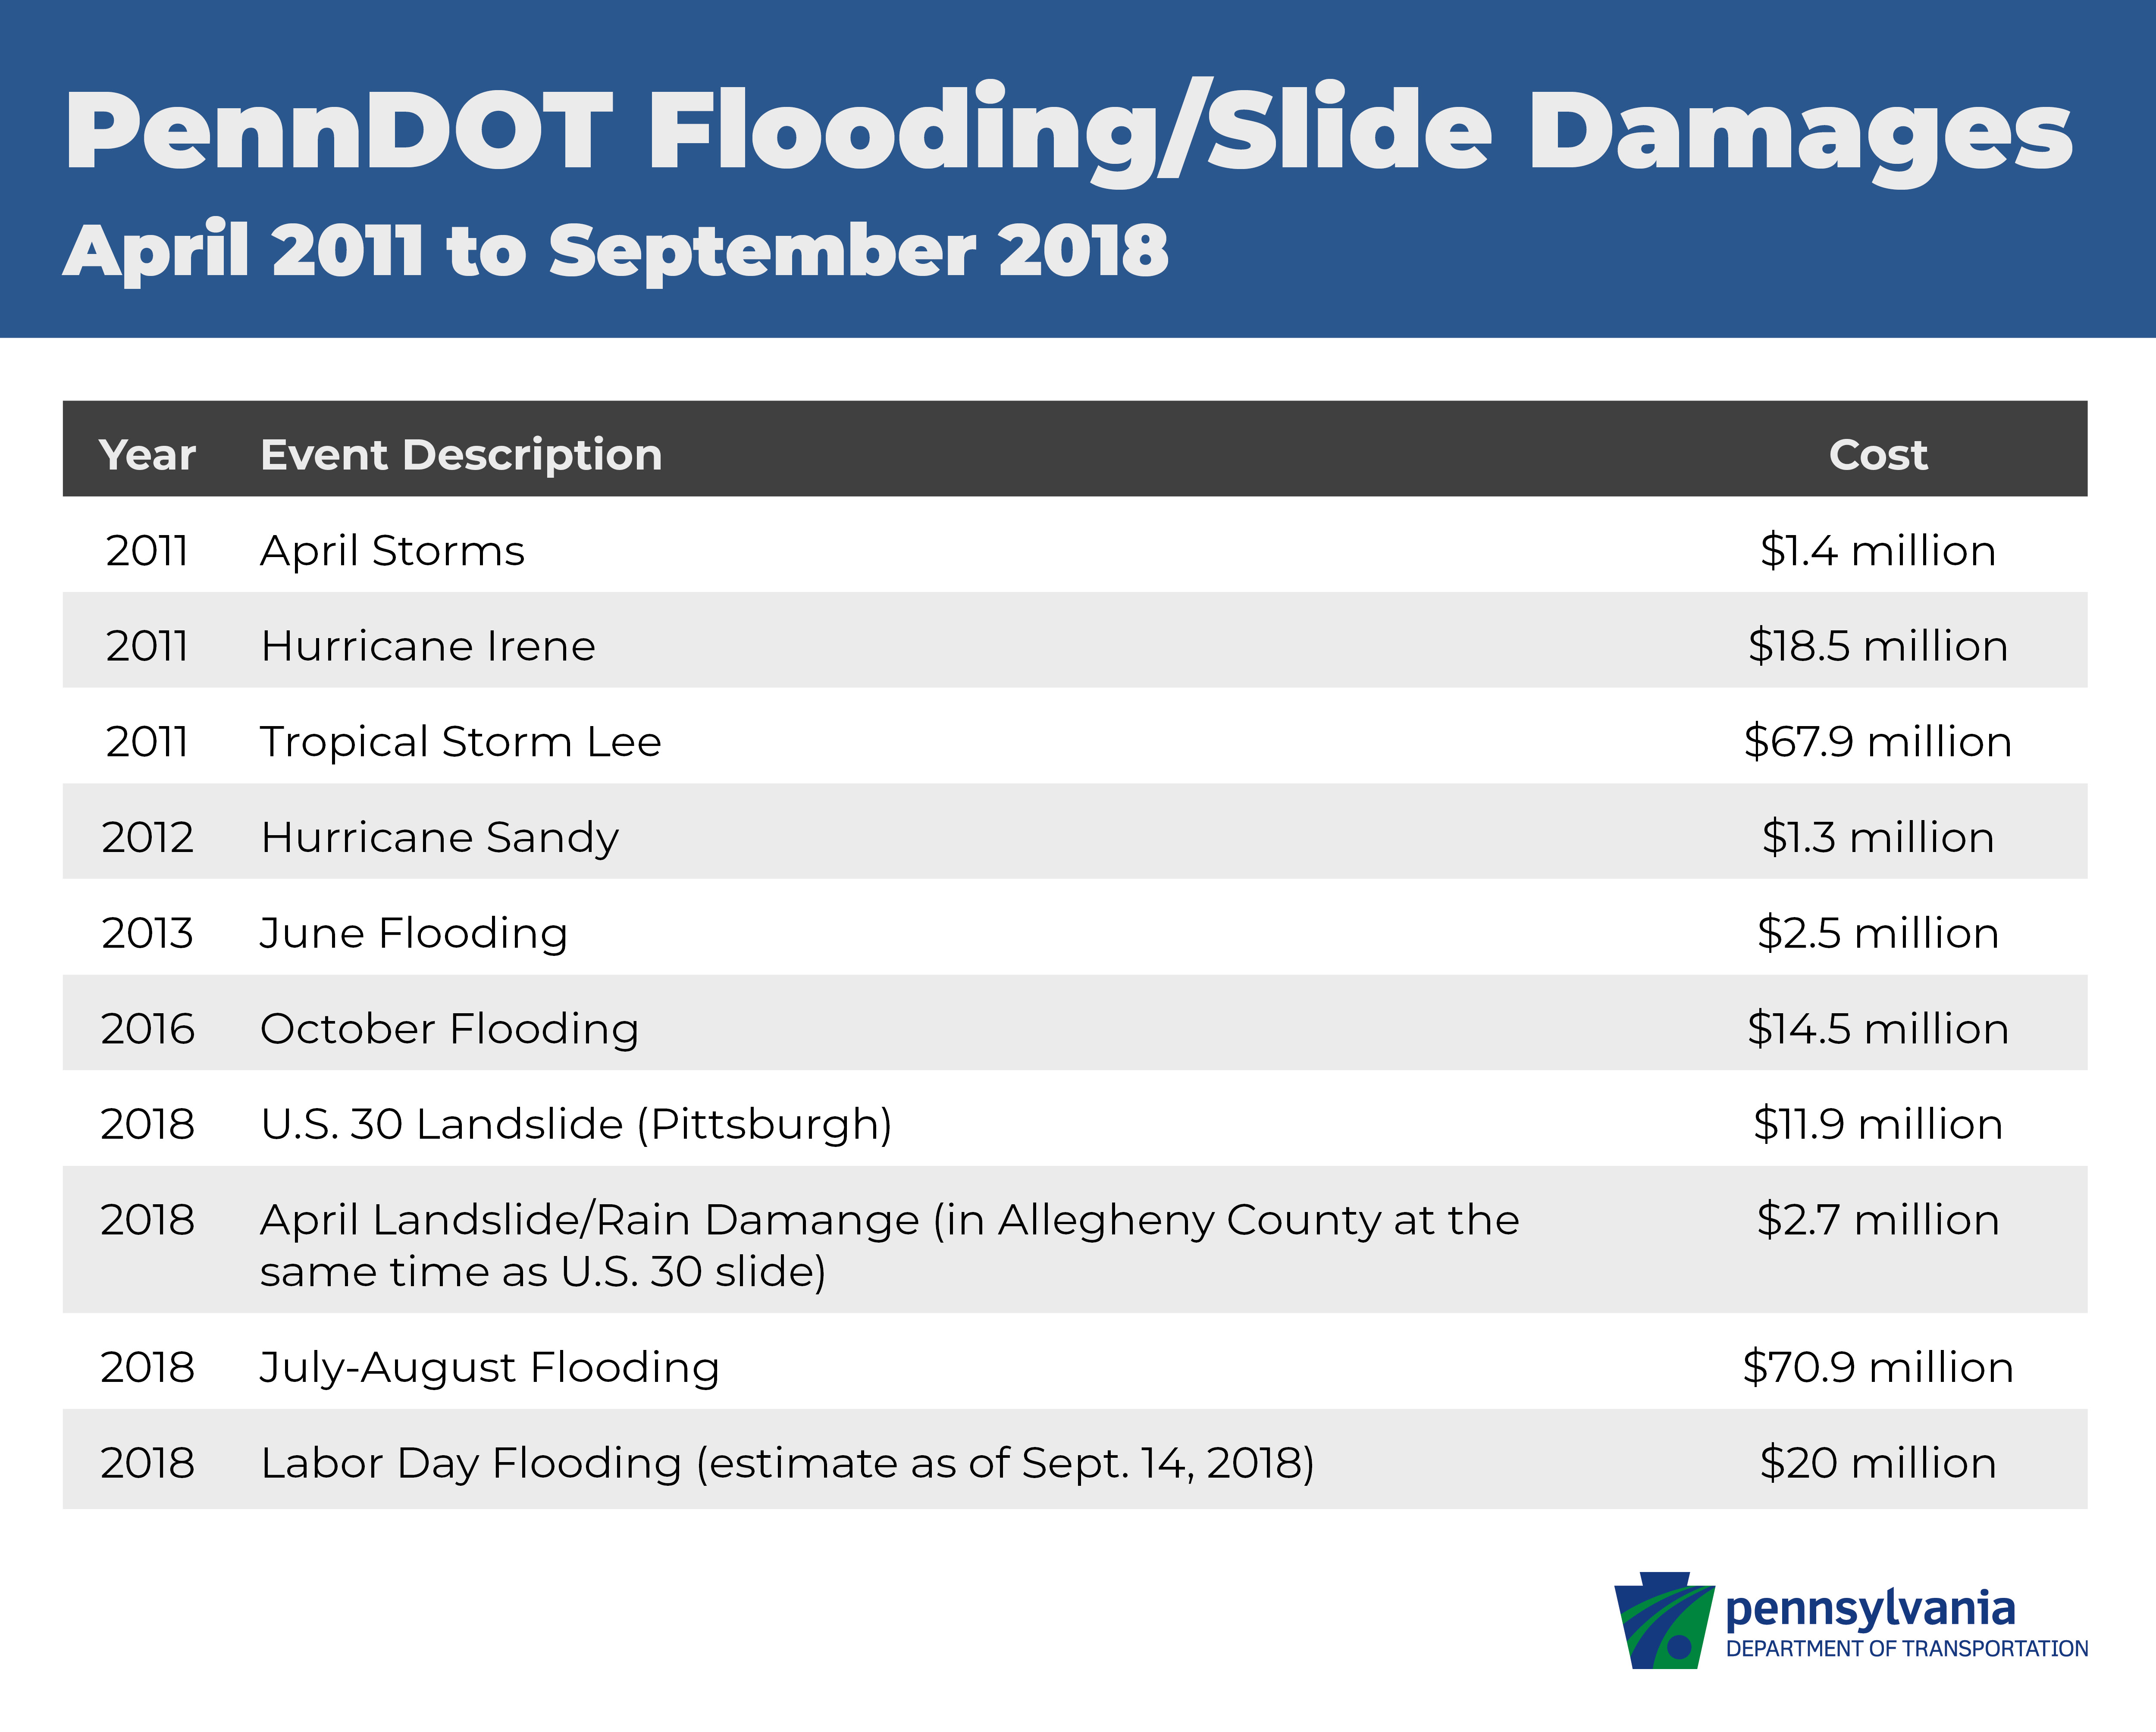 table comparing flood damage totals